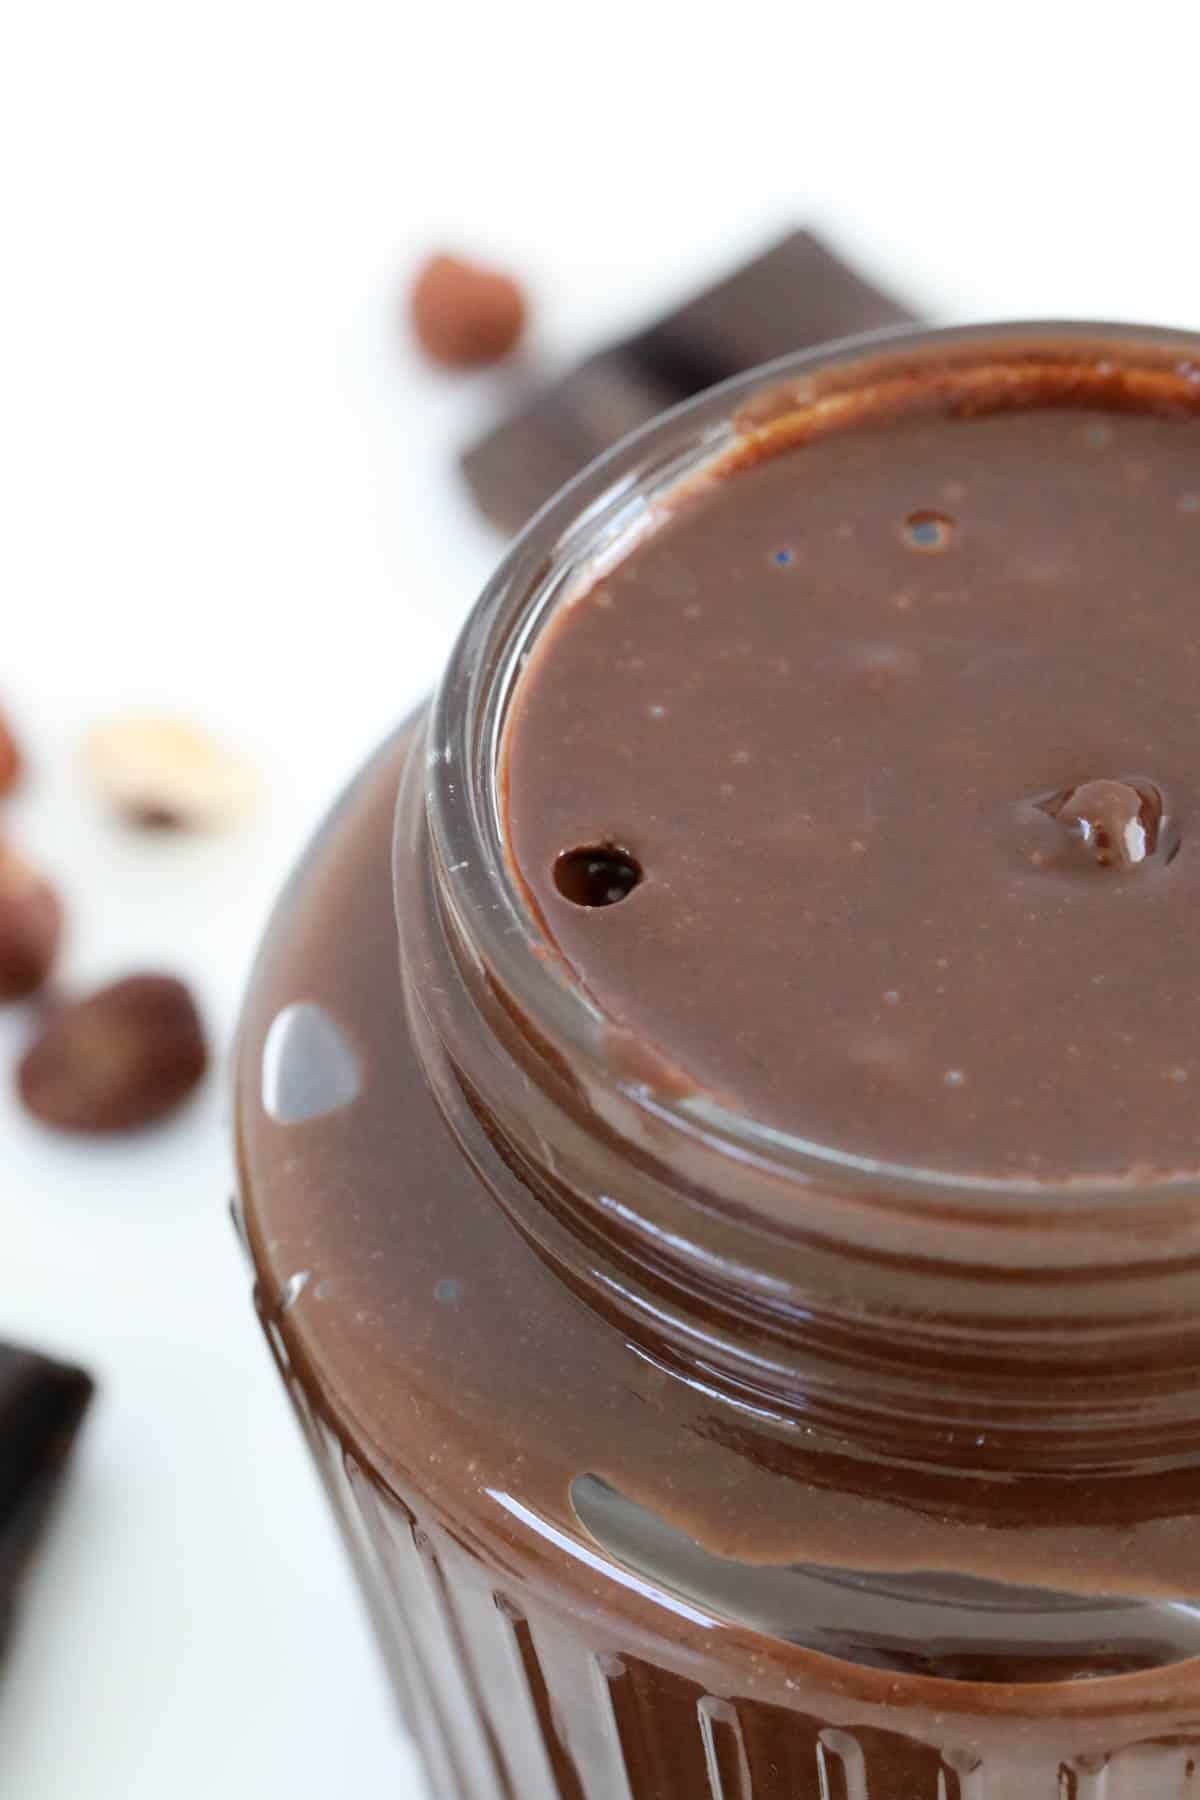 A close up of a glass jar filled with homemade chocolate hazelnut spread.